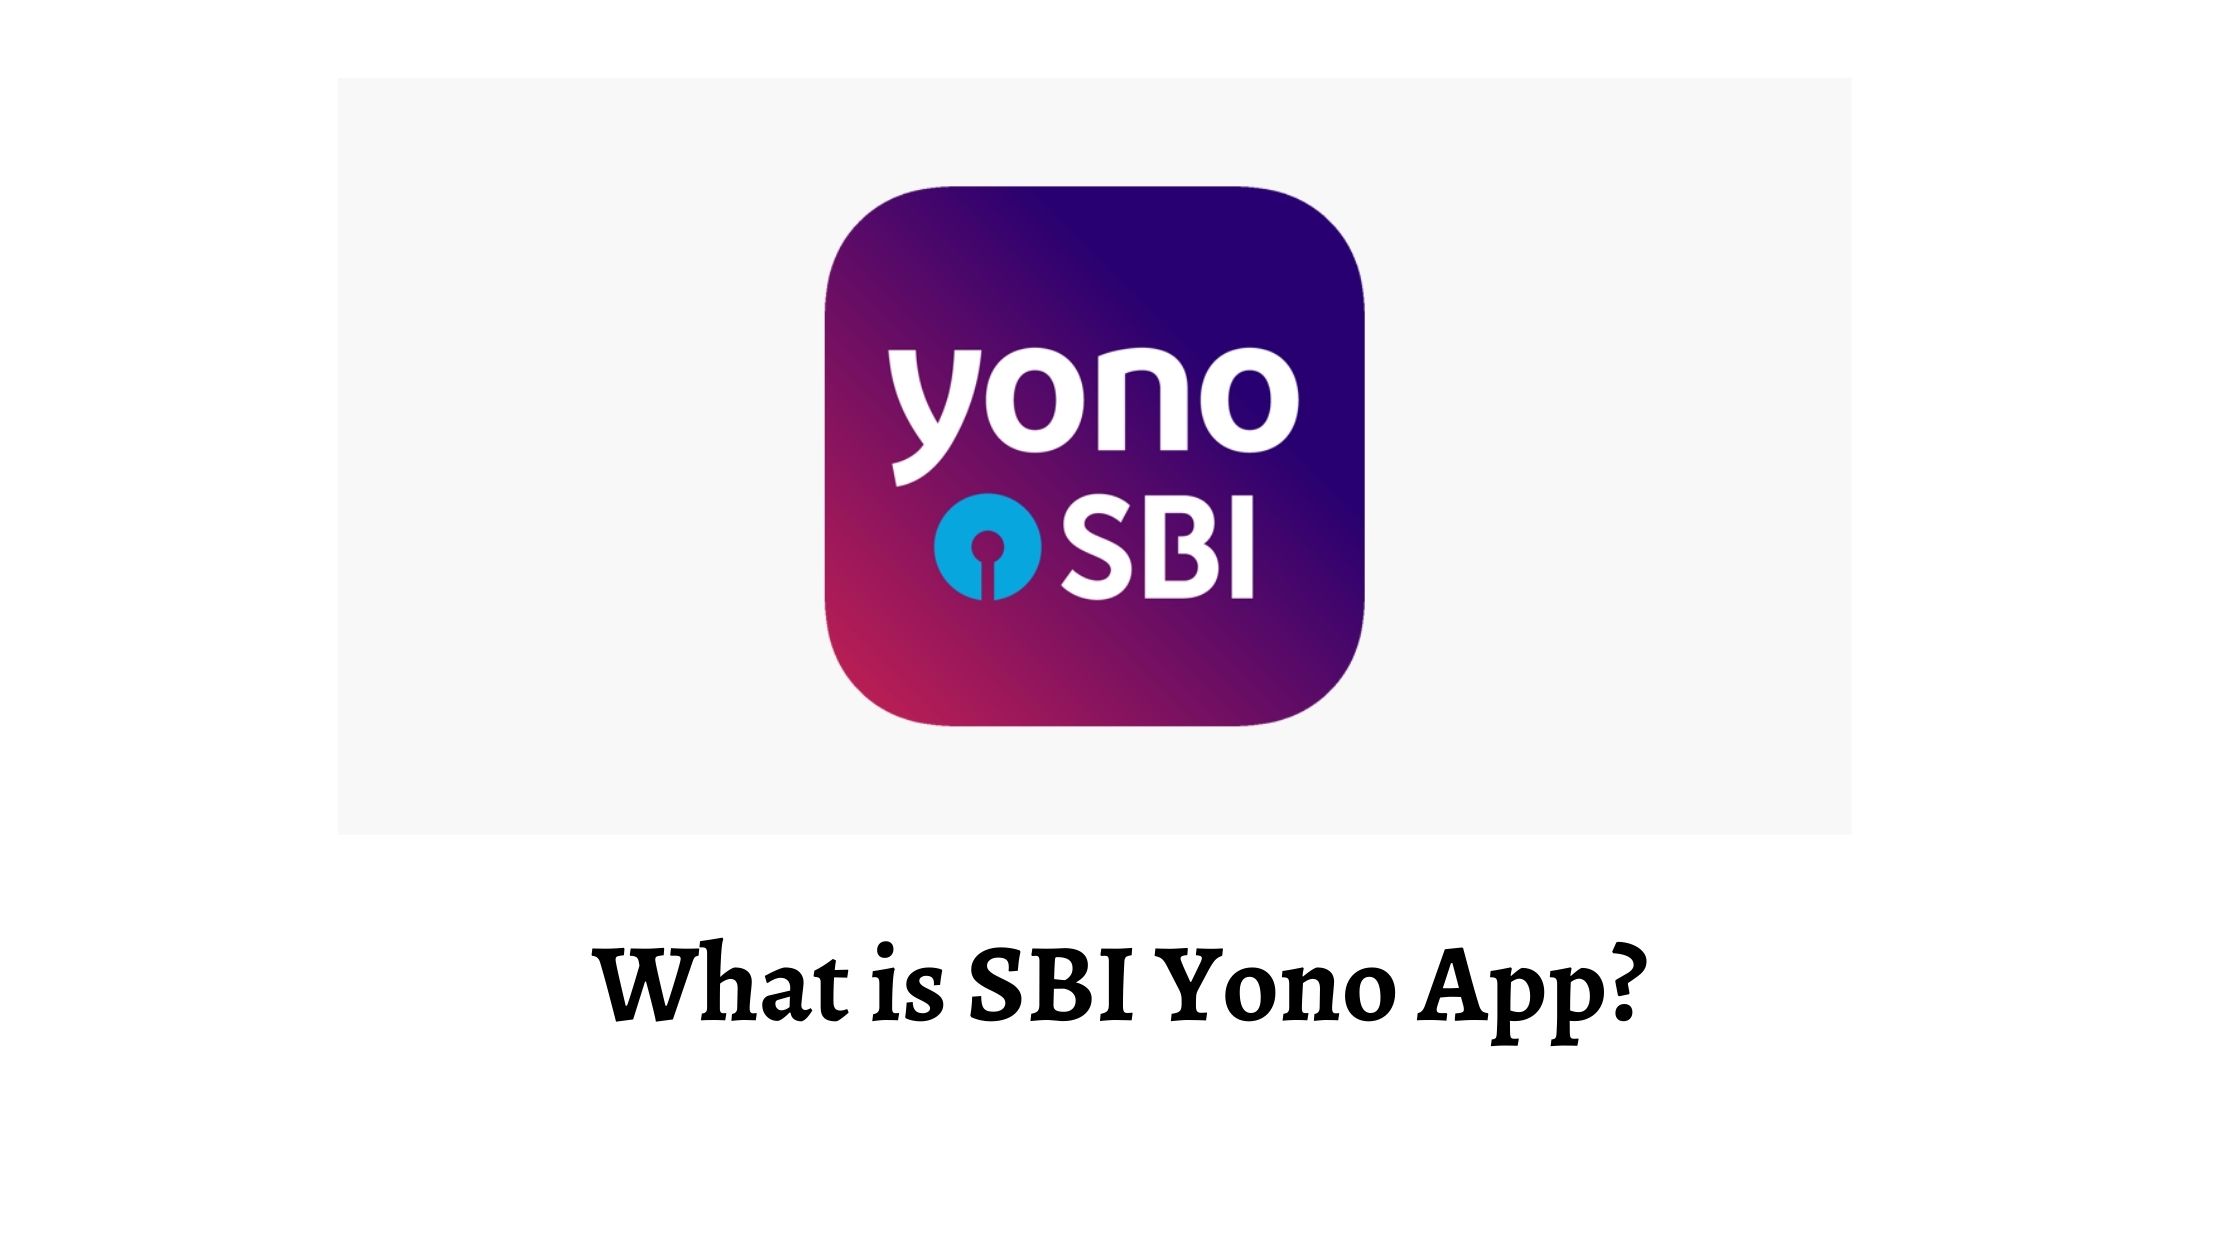 What is SBI Yono app?